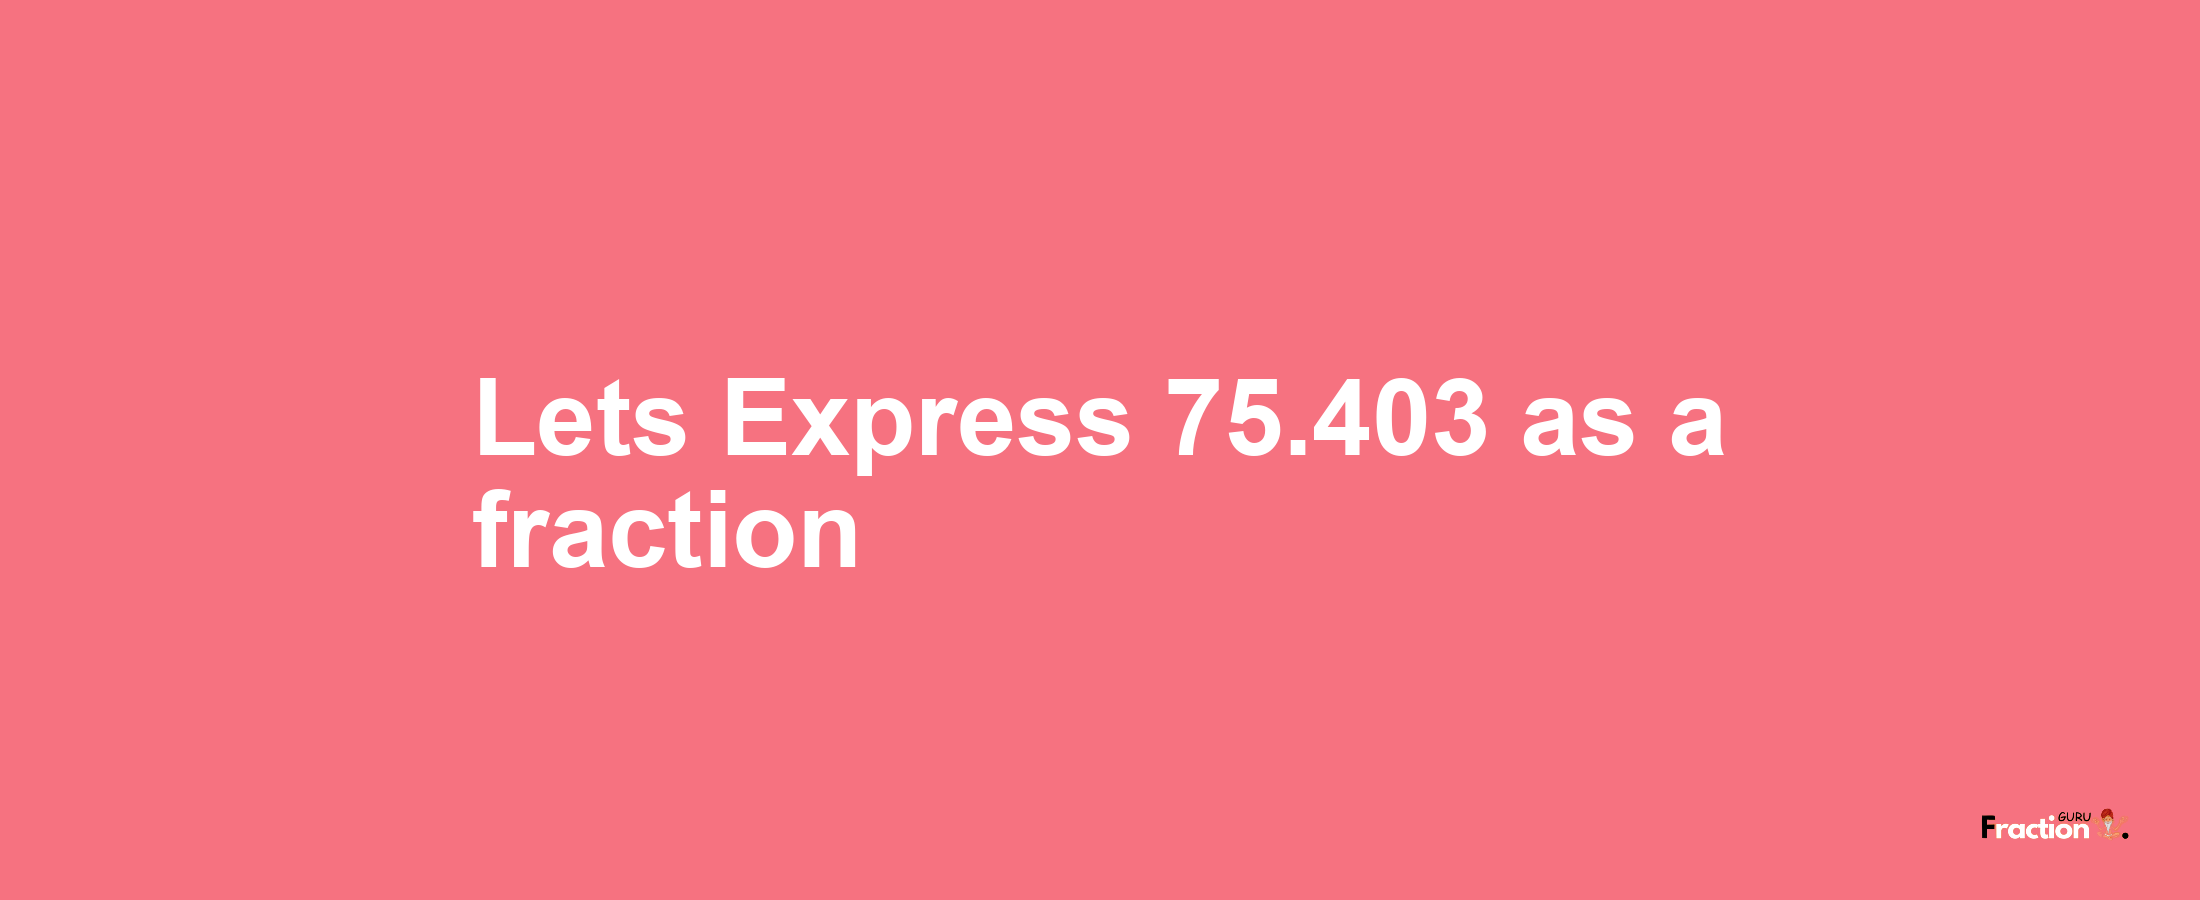 Lets Express 75.403 as afraction